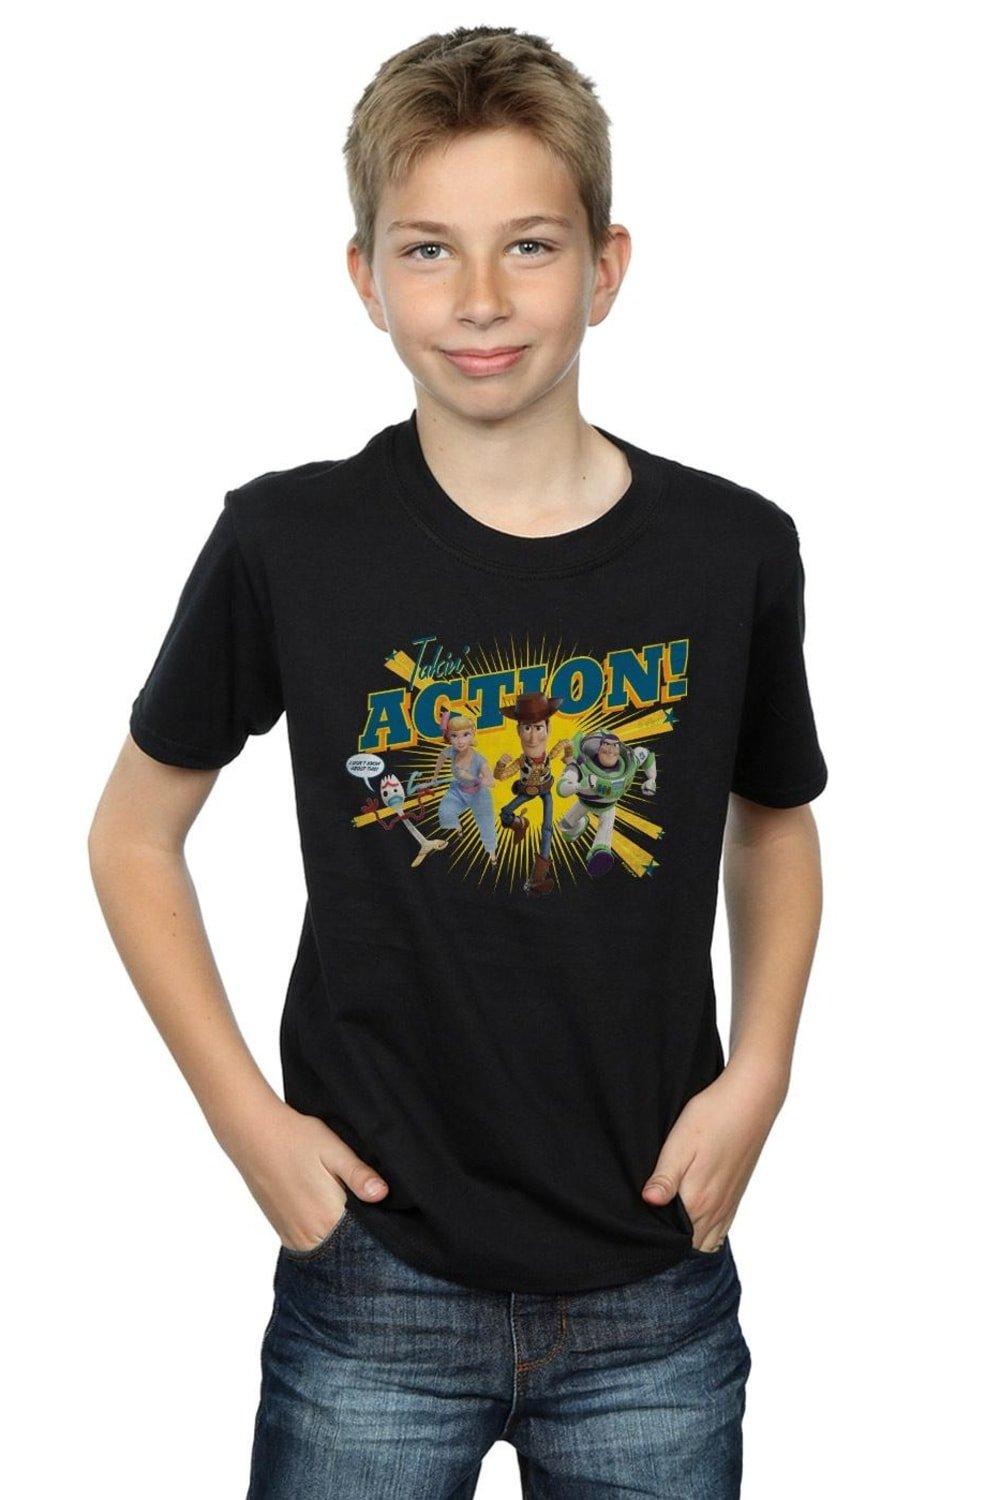 Toy Story 4 Takin’ Action T-Shirt